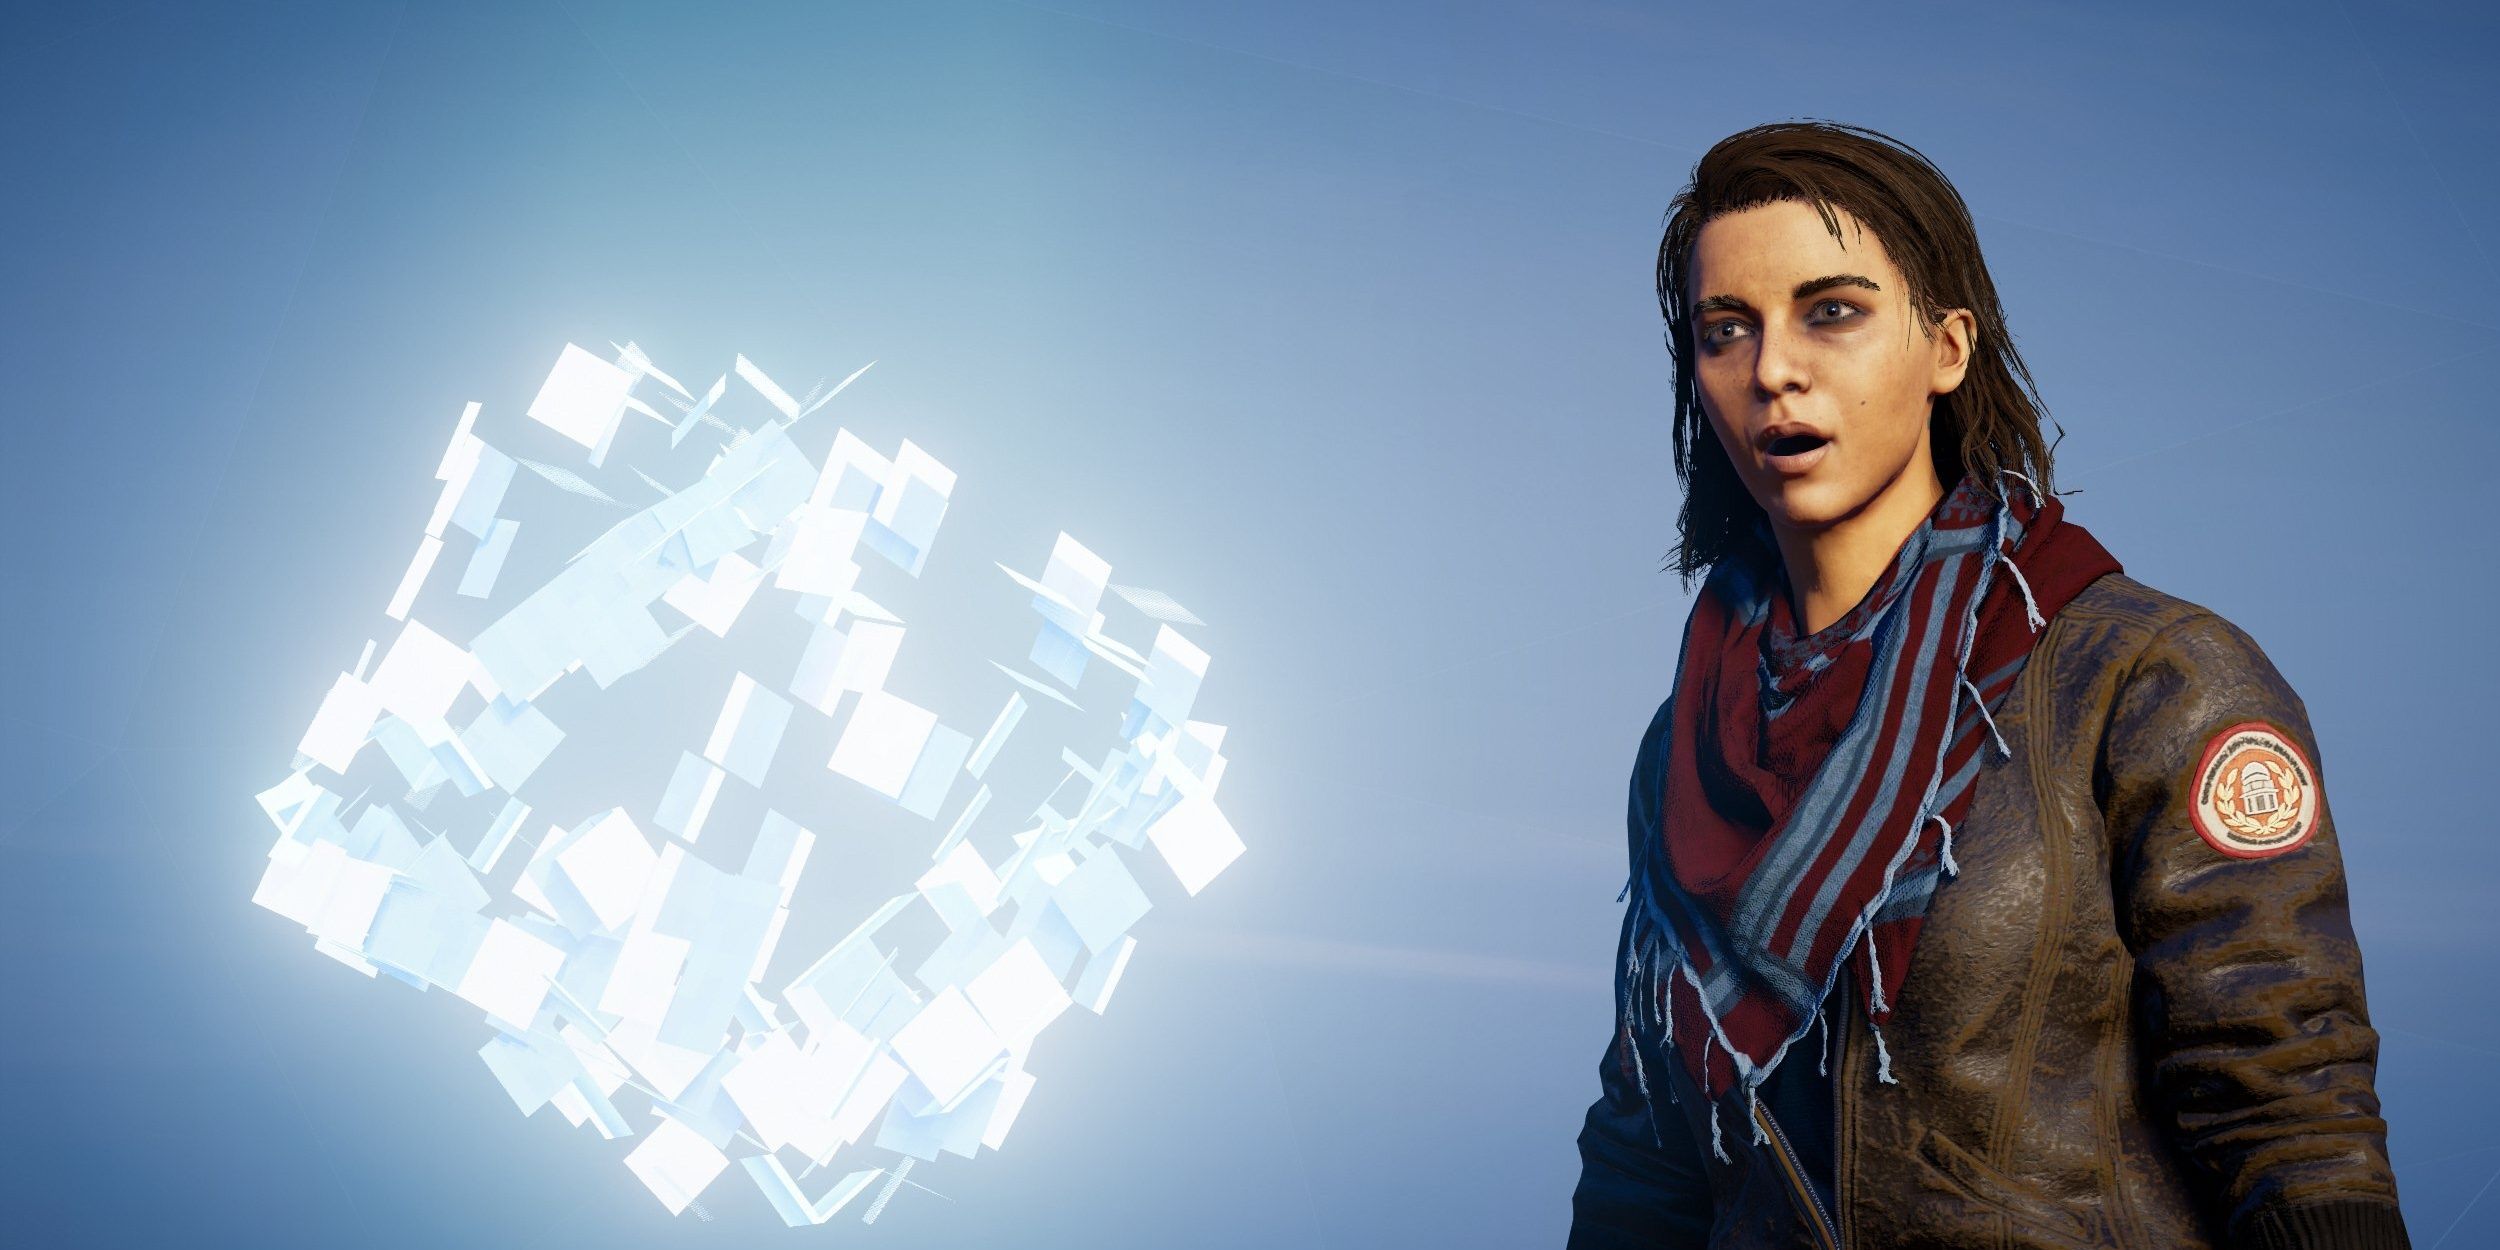 Layla encounters an Animus Anomaly in Assassin's Creed Valhalla